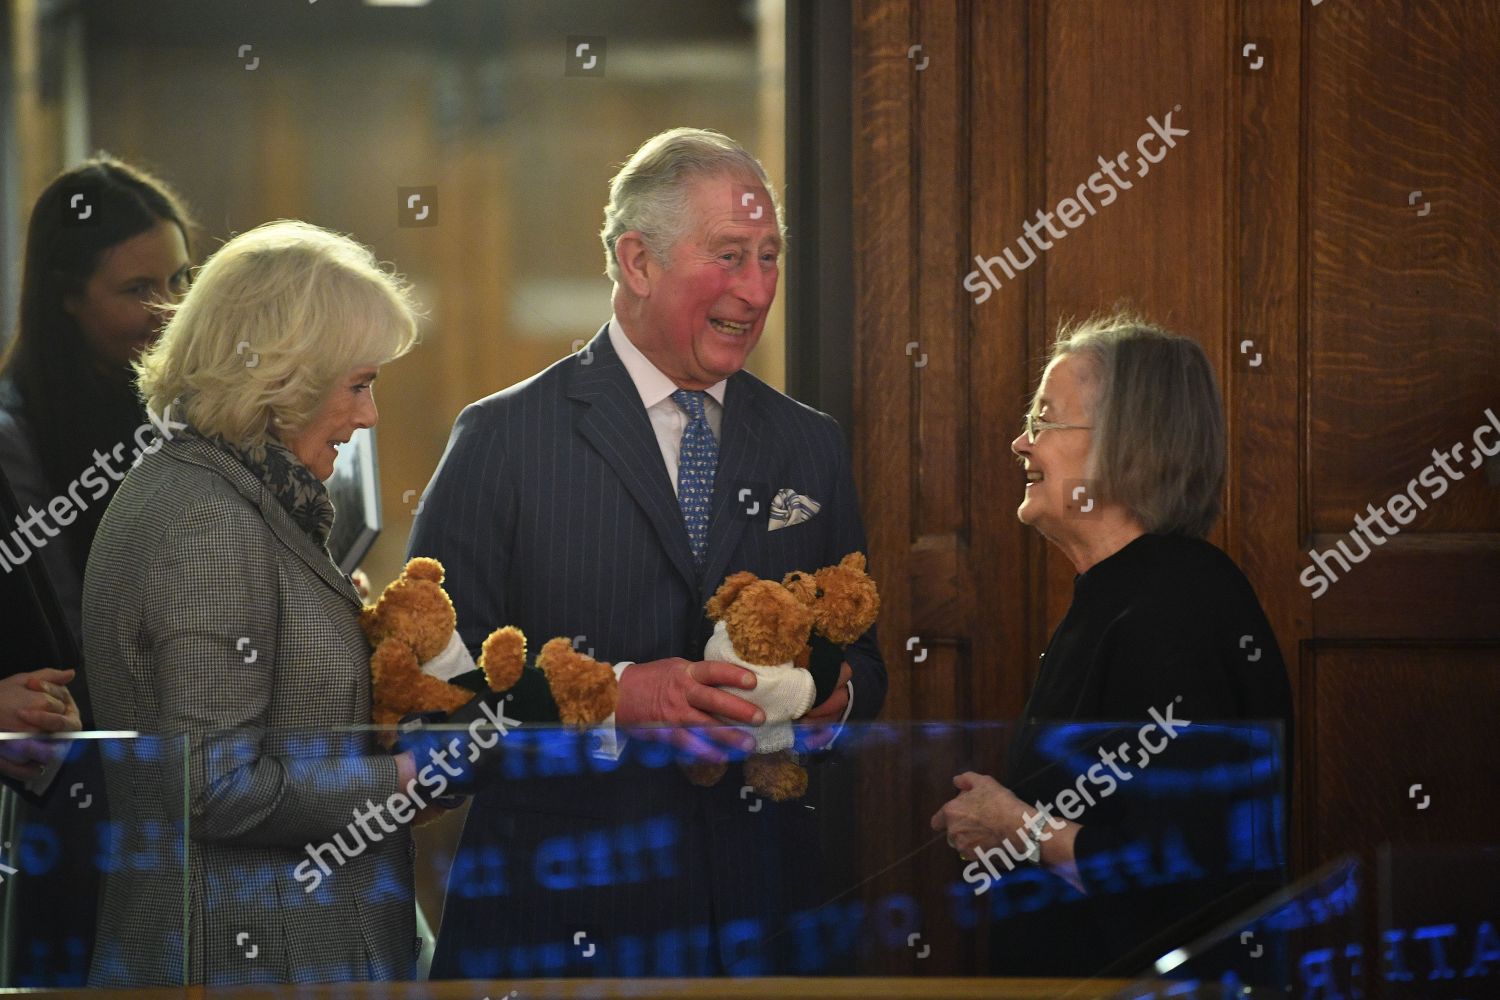 prince-charles-and-camilla-duchess-of-cornwall-visit-to-the-supreme-court-london-uk-shutterstock-editorial-10088612l.jpg